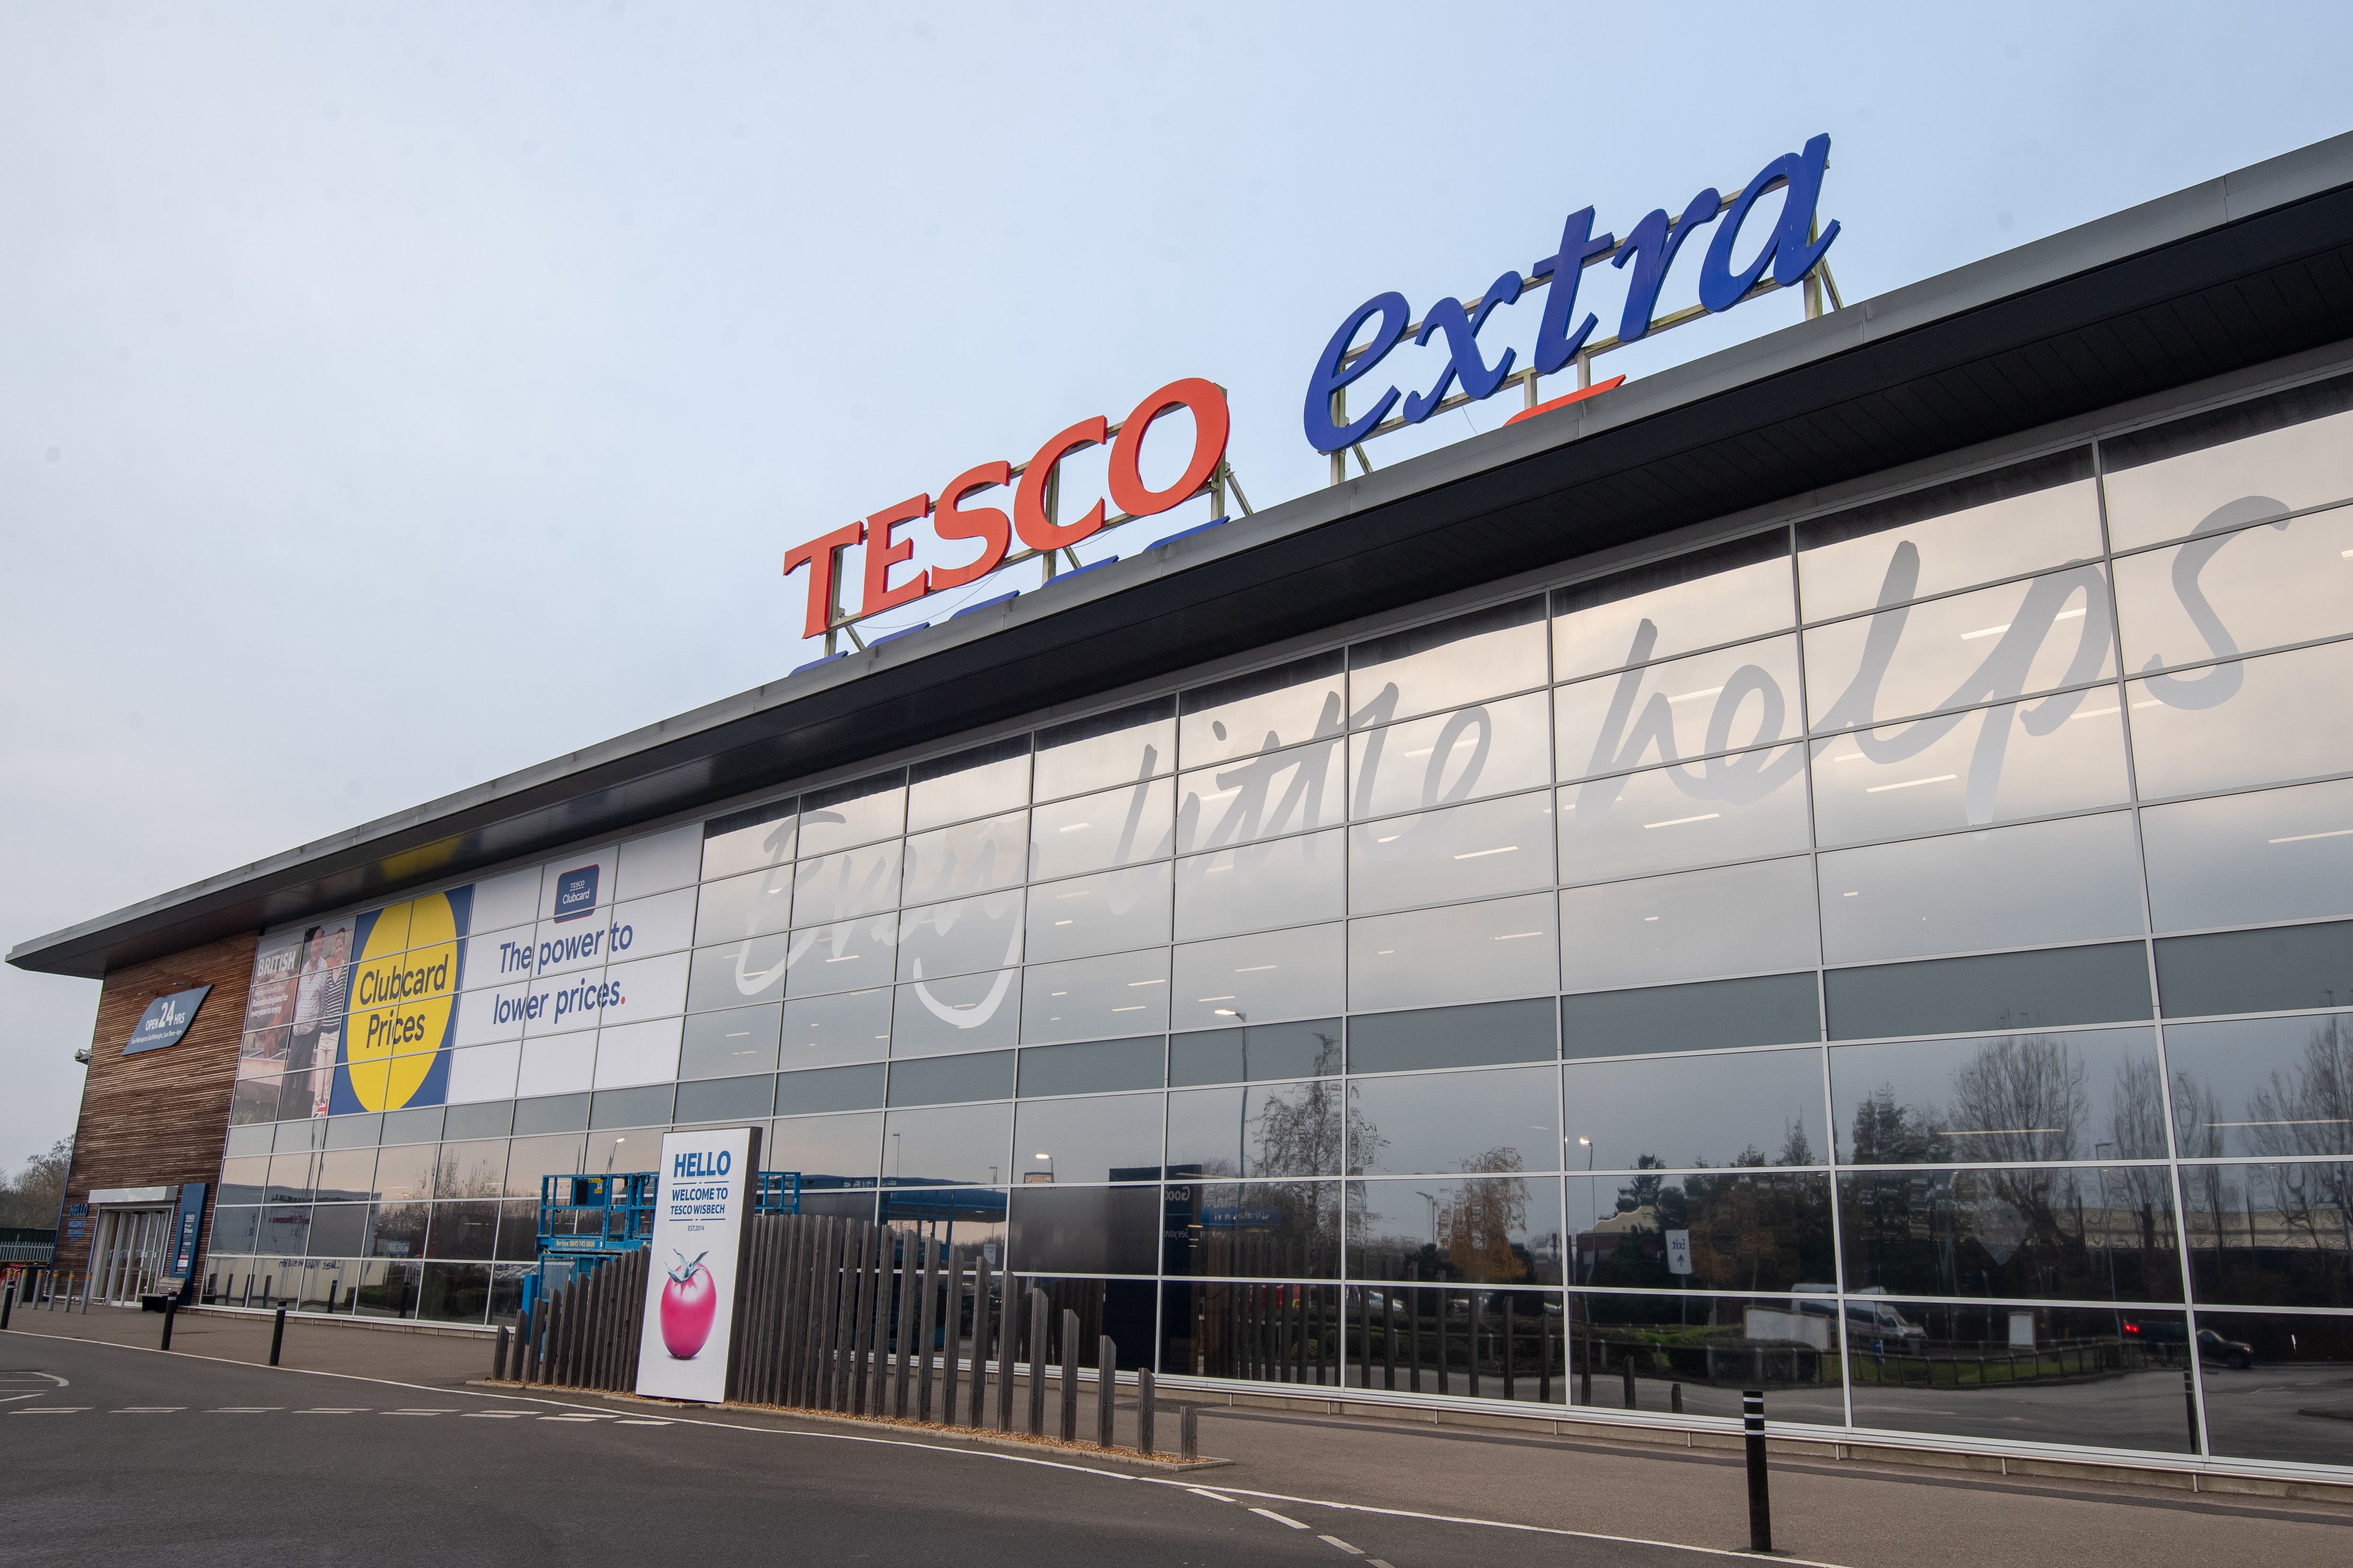 Shoppers paid more for less in Tesco last year as it made £1bn profit despite inflation